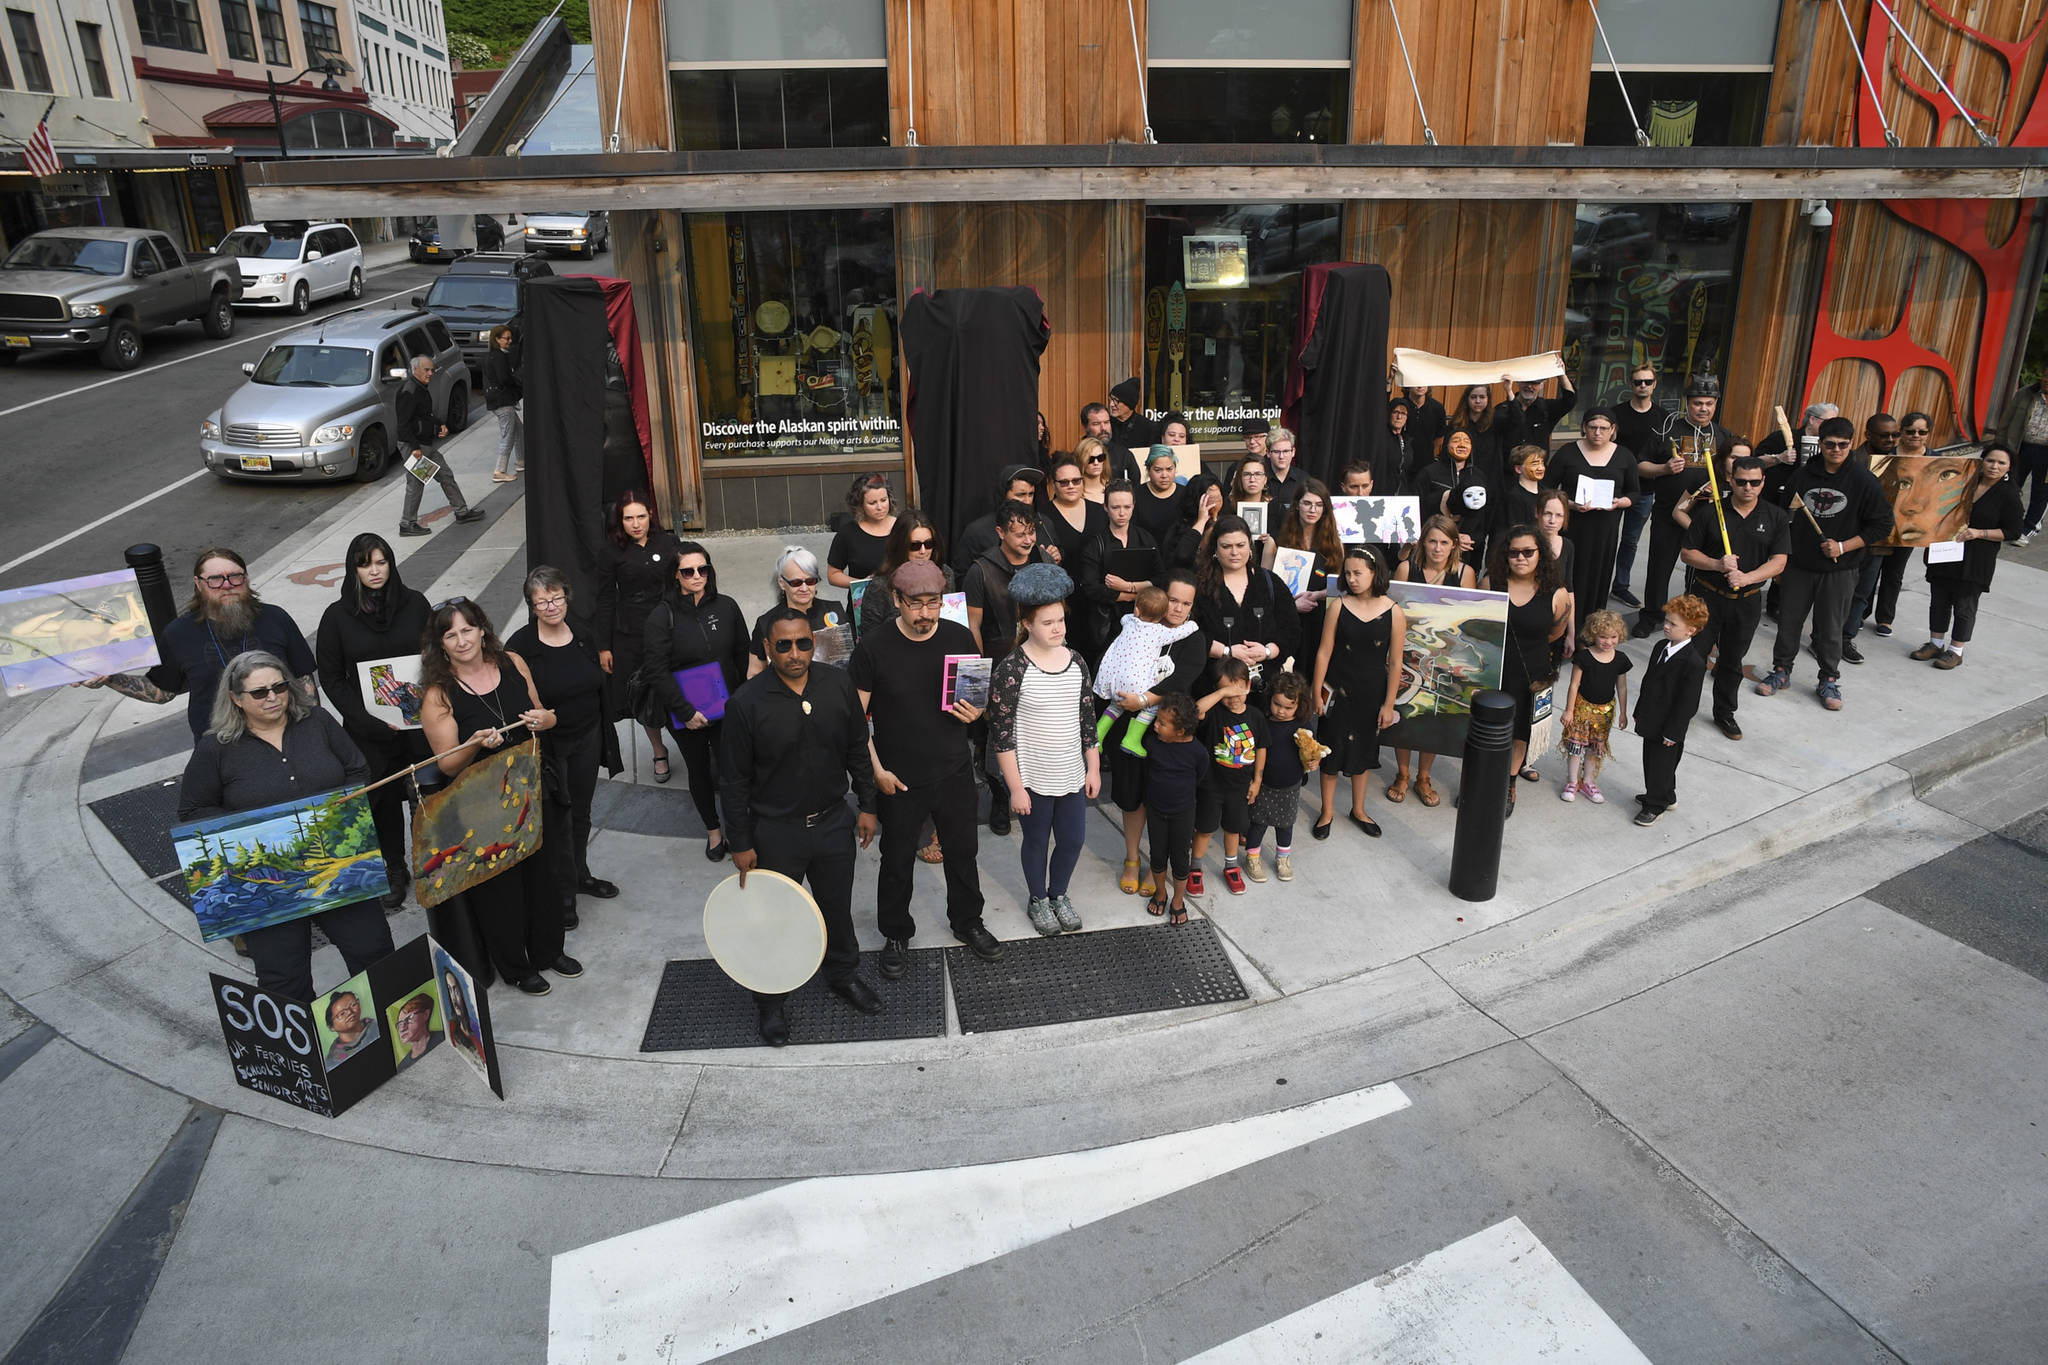 About 50 artists stand with their work in front of the Sealaska Heritage Institute on Tuesday, July 9, 2019, to protest heavy cuts to state arts programs. (Michael Penn | Juneau Empire)